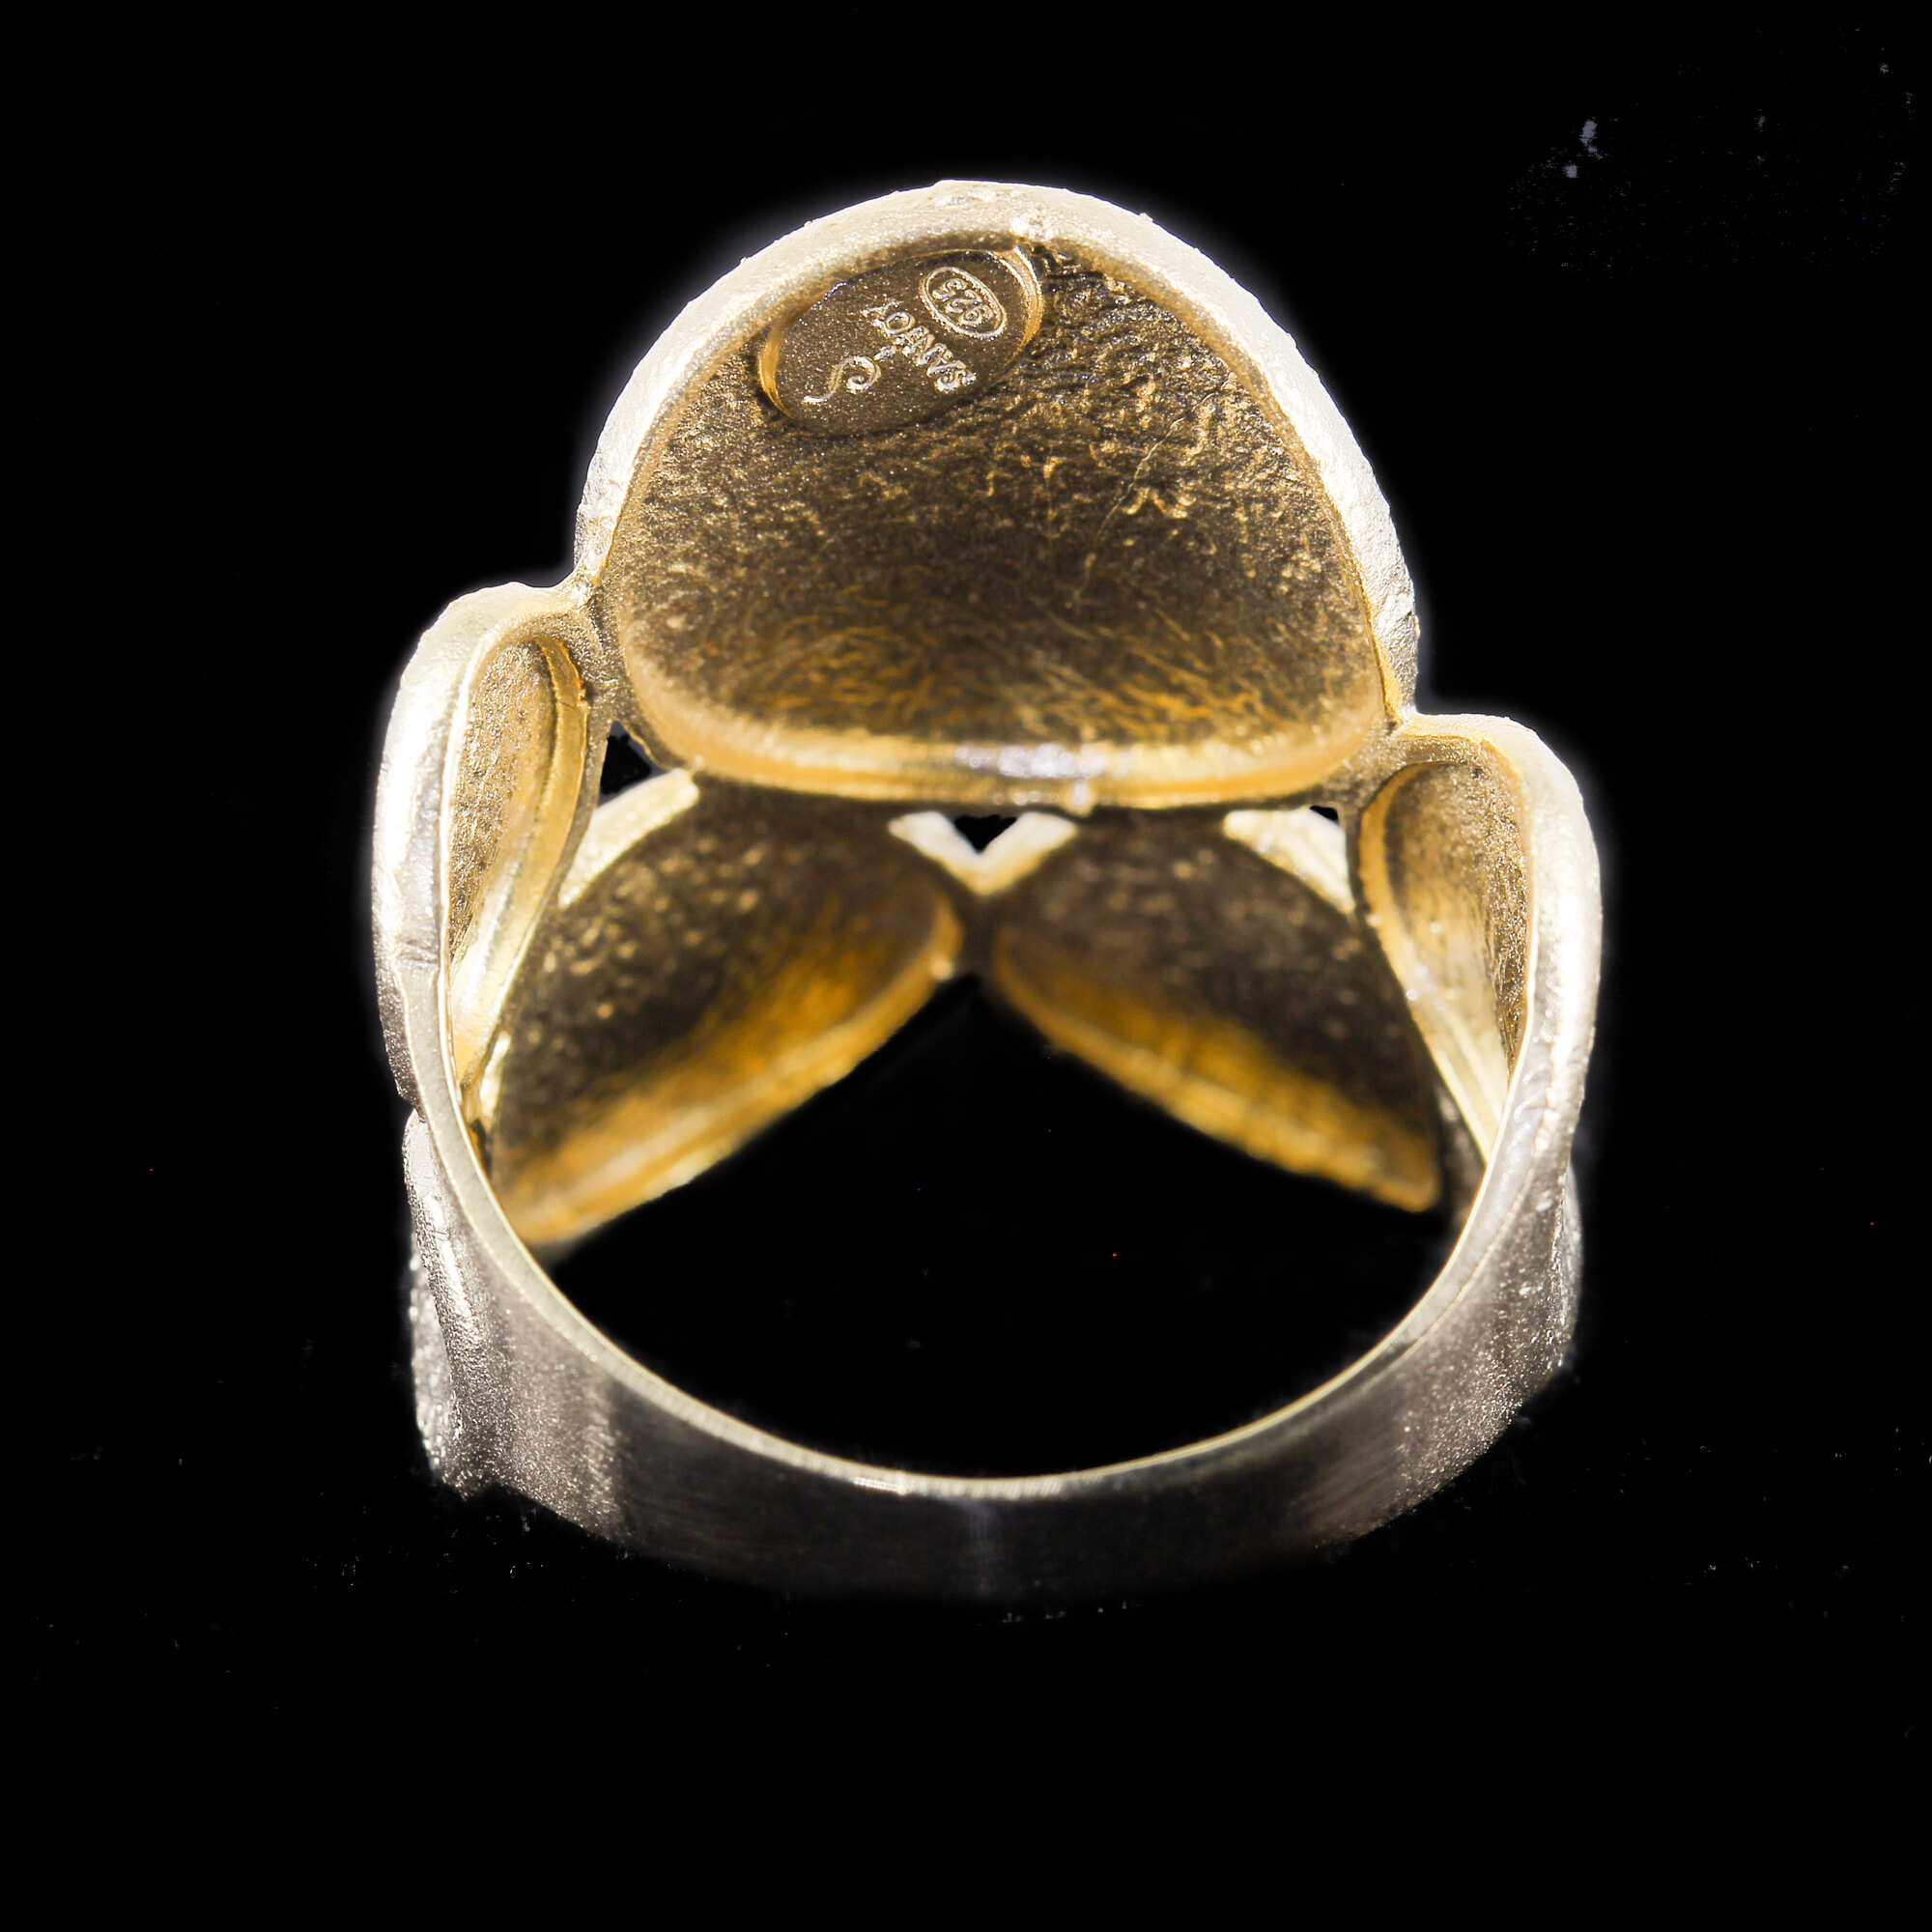 Gold-plated ring with oval-shaped details